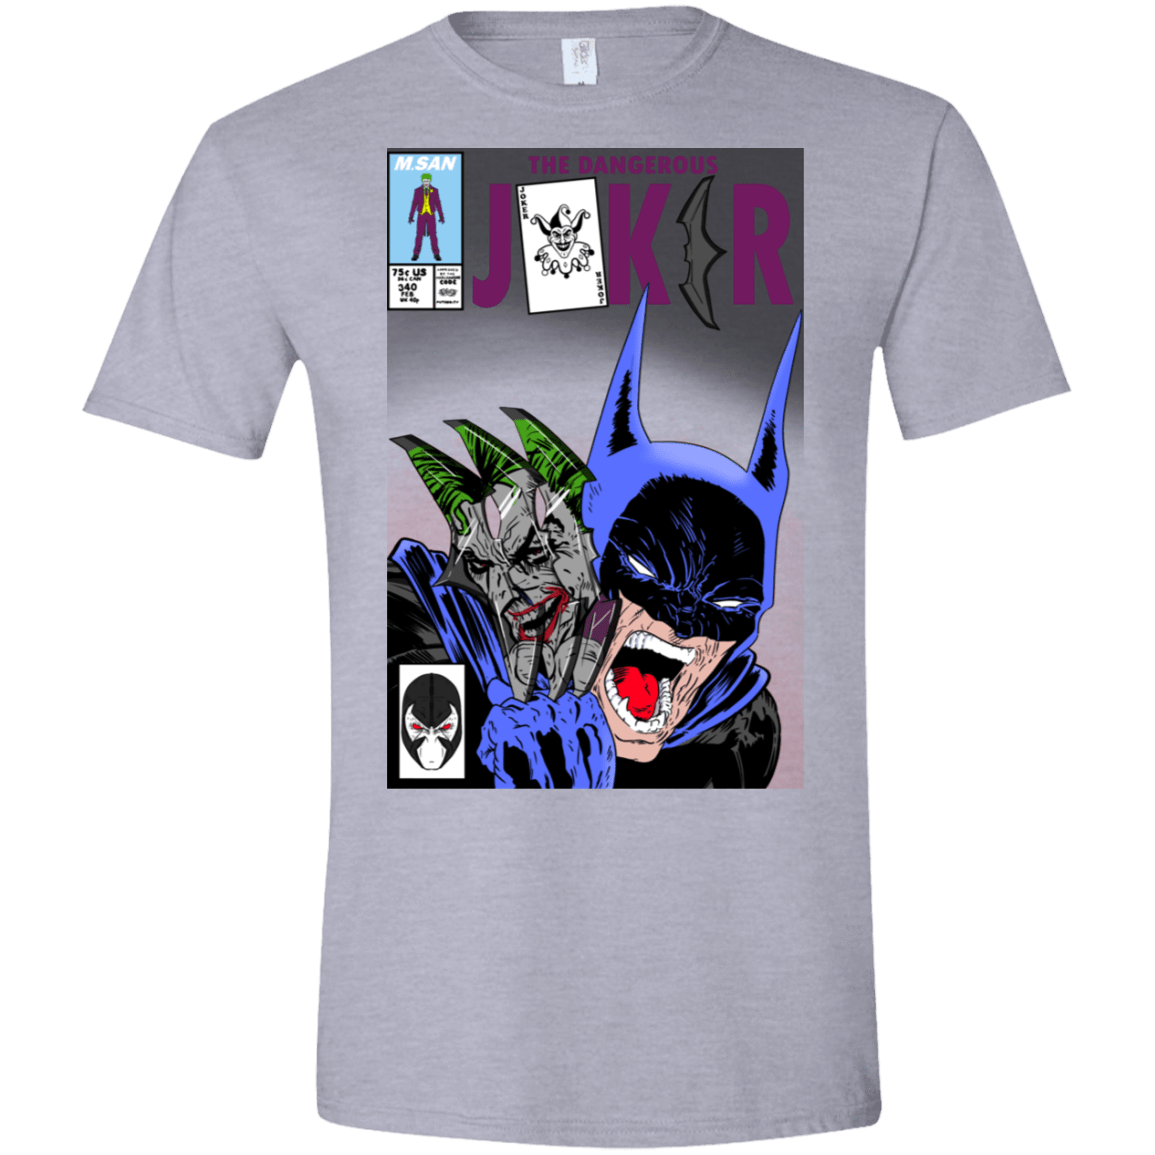 T-Shirts Sport Grey / X-Small The Dangerous Joker Men's Semi-Fitted Softstyle